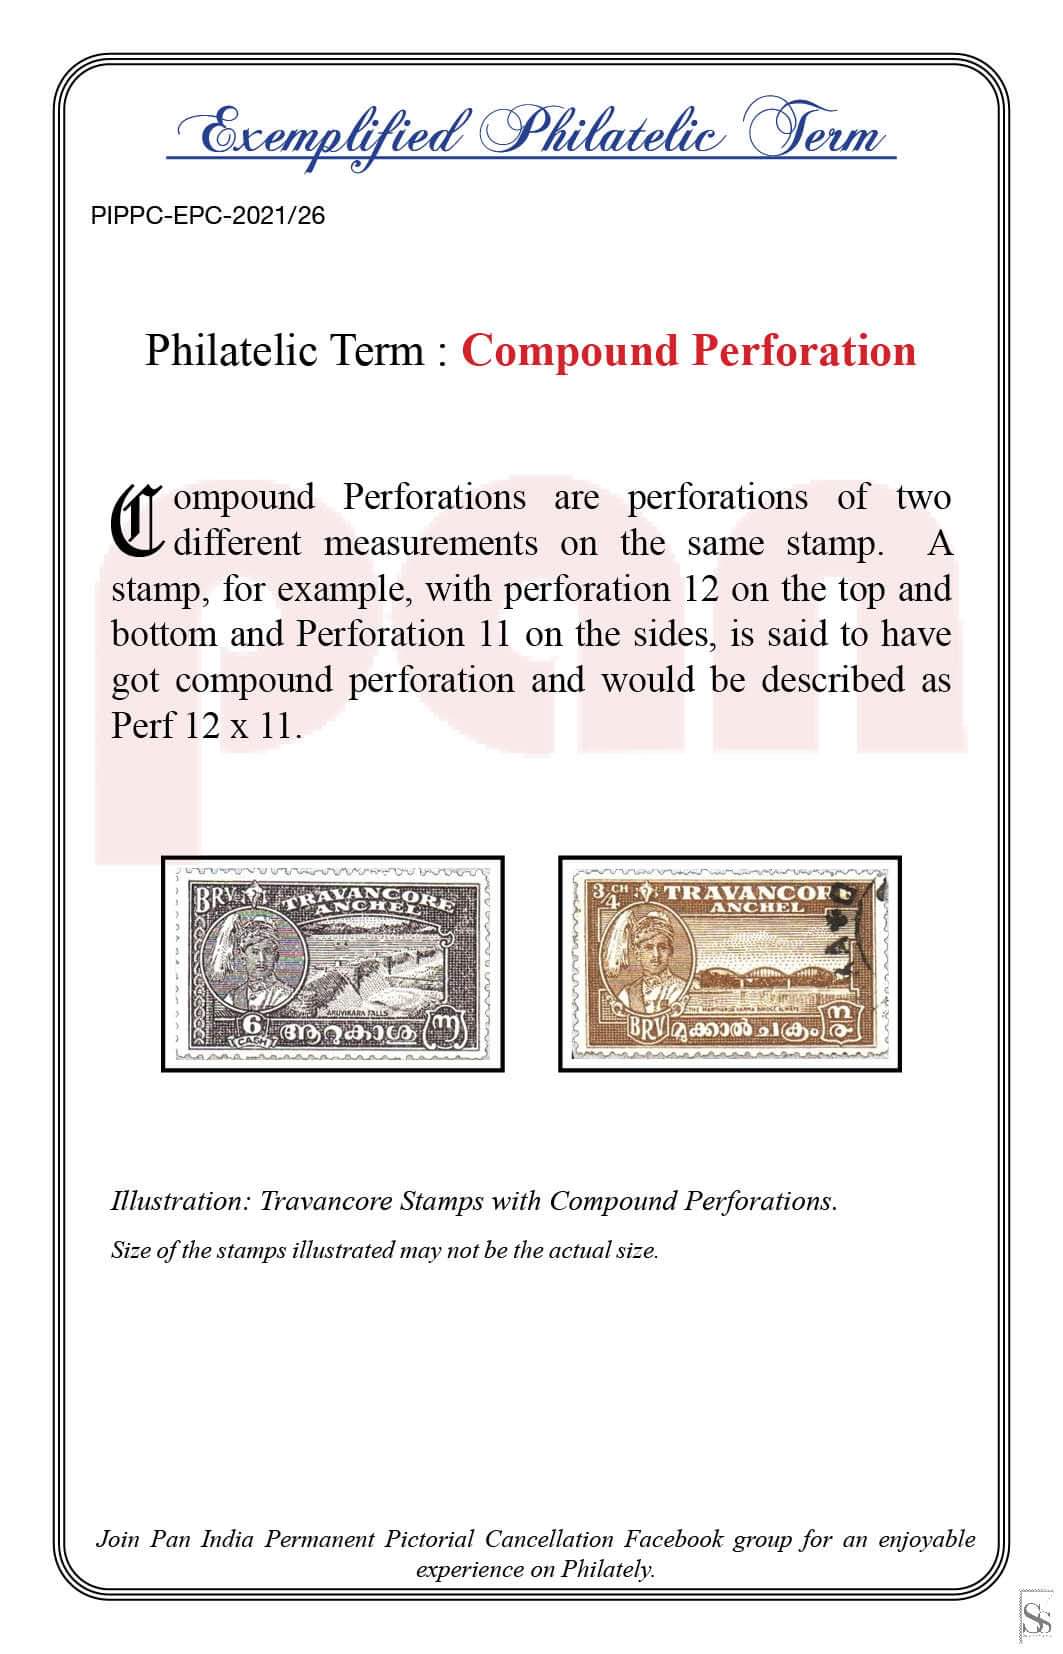 26. Today's Exemplified Philatelic term- Compound Perforation